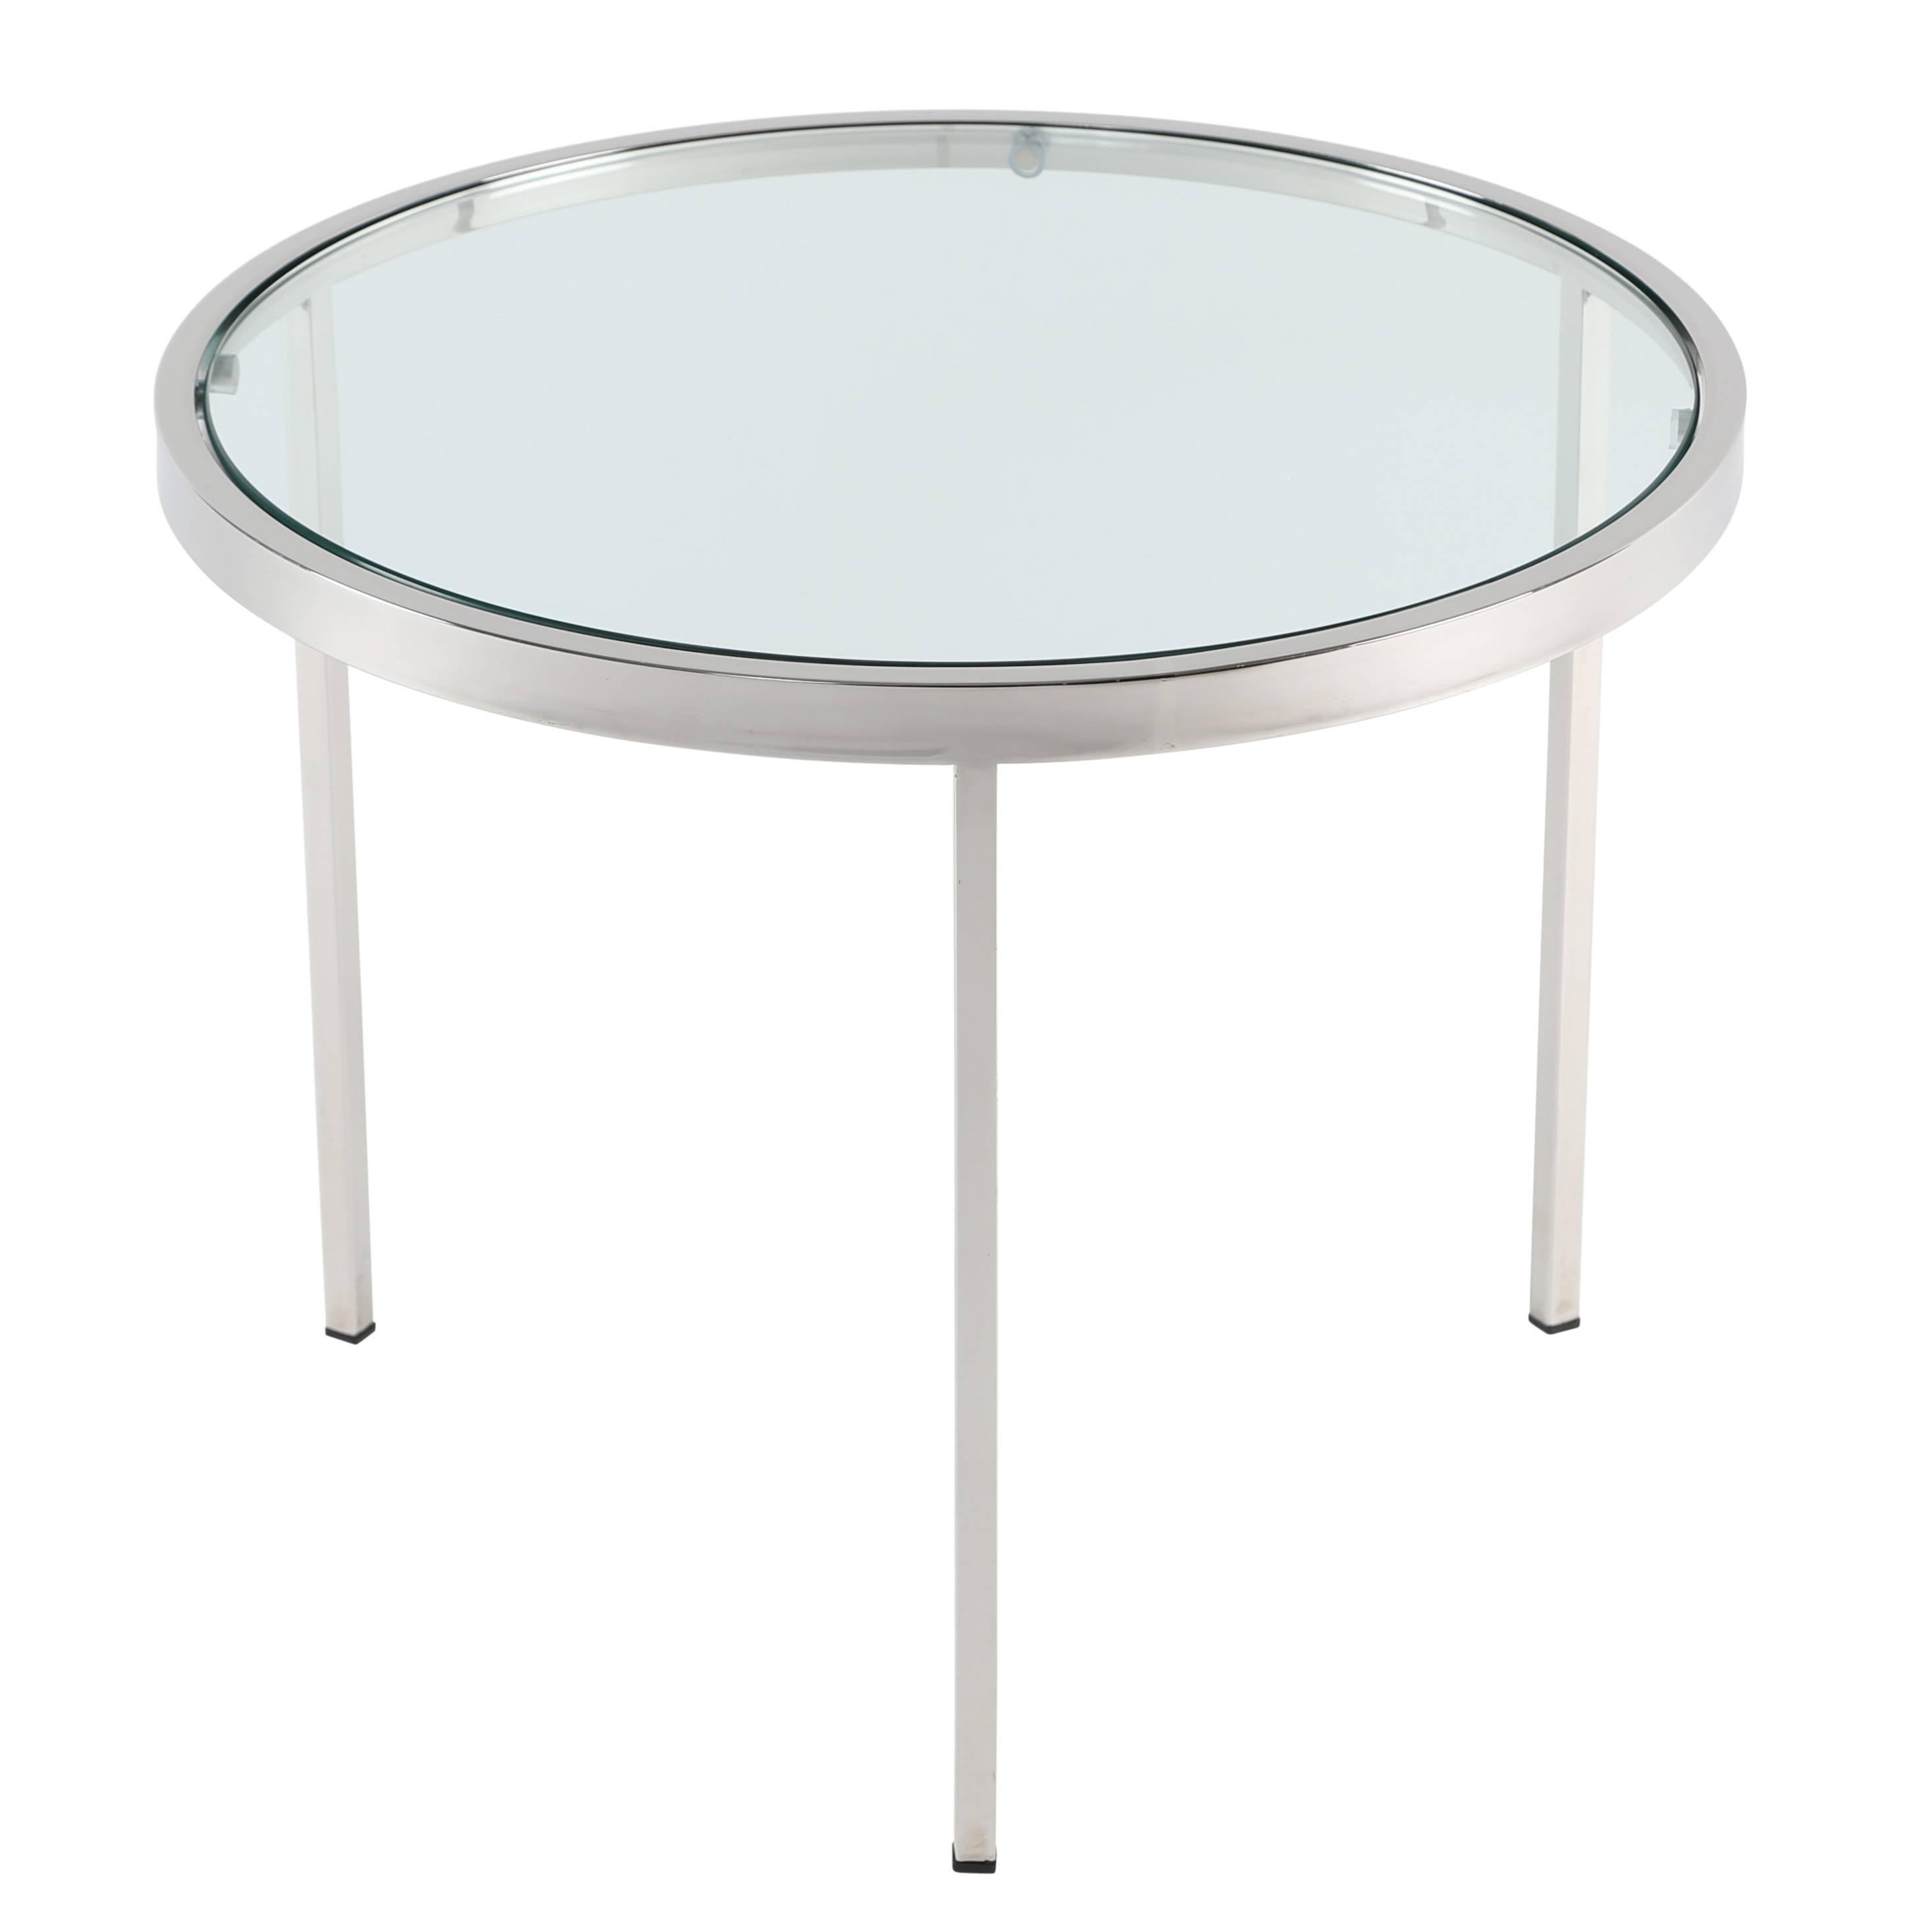 Milo Baughman Round Chrome Side Table with Inset Glass Top, circa 1970s